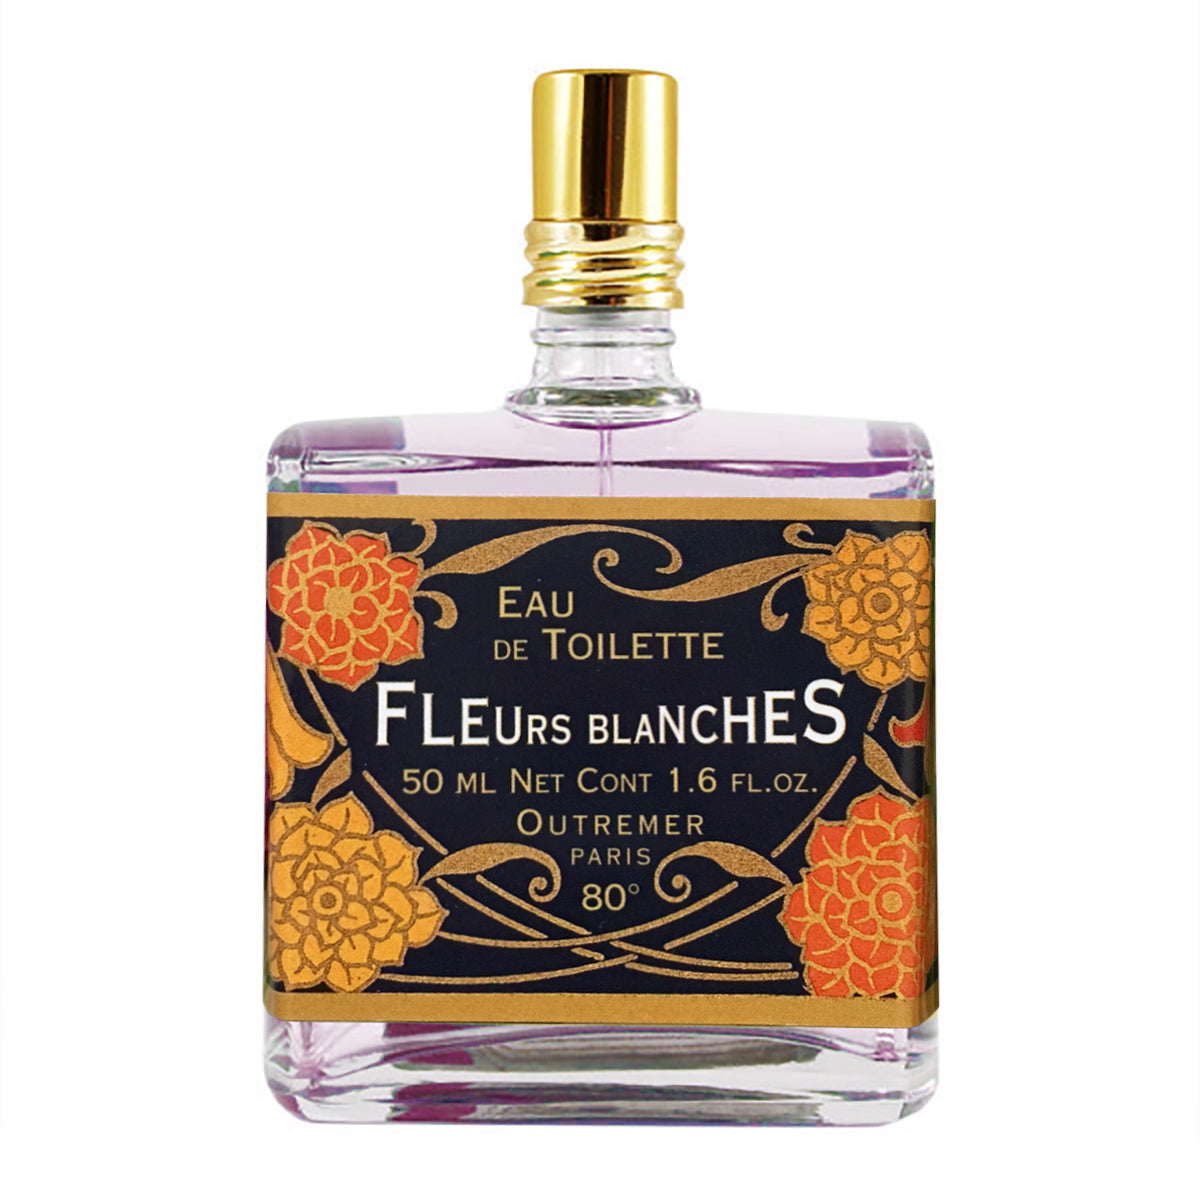 Primary image of Fleurs Blanche EDT 50ml